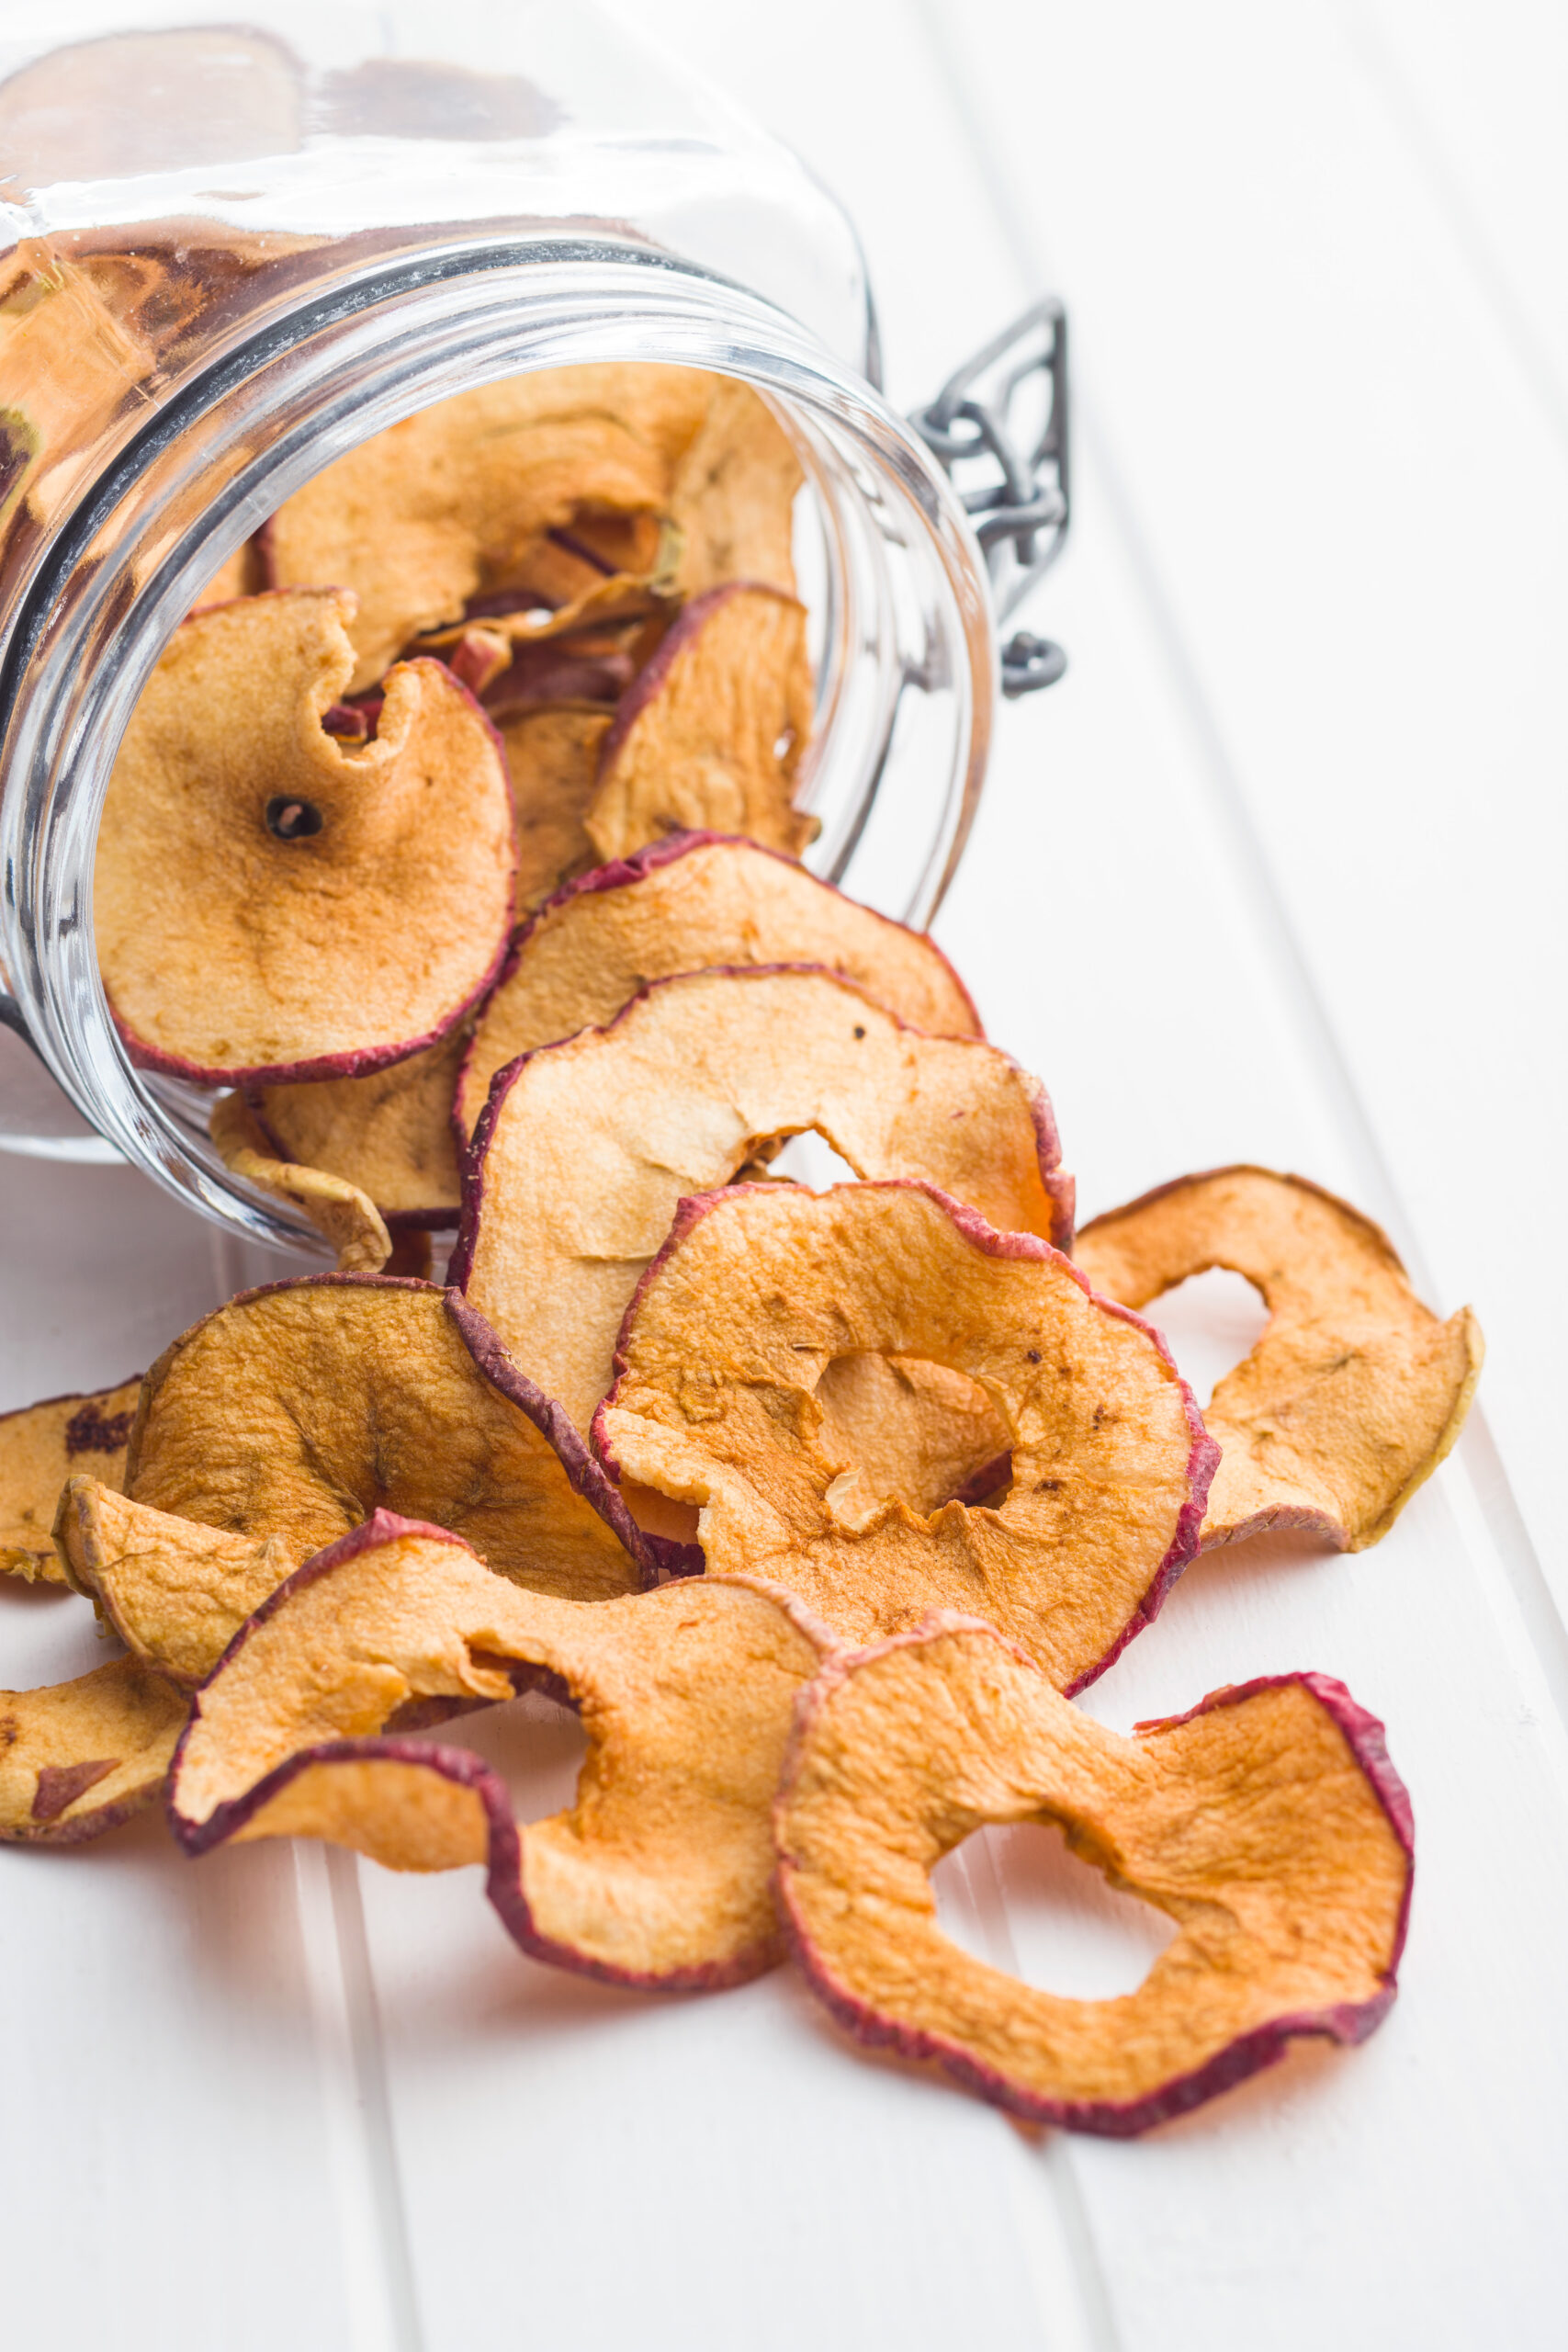 http://www.nikkisplate.com/wp-content/uploads/2022/09/Cinnamon-Dried-Apple-Rings-scaled.jpg